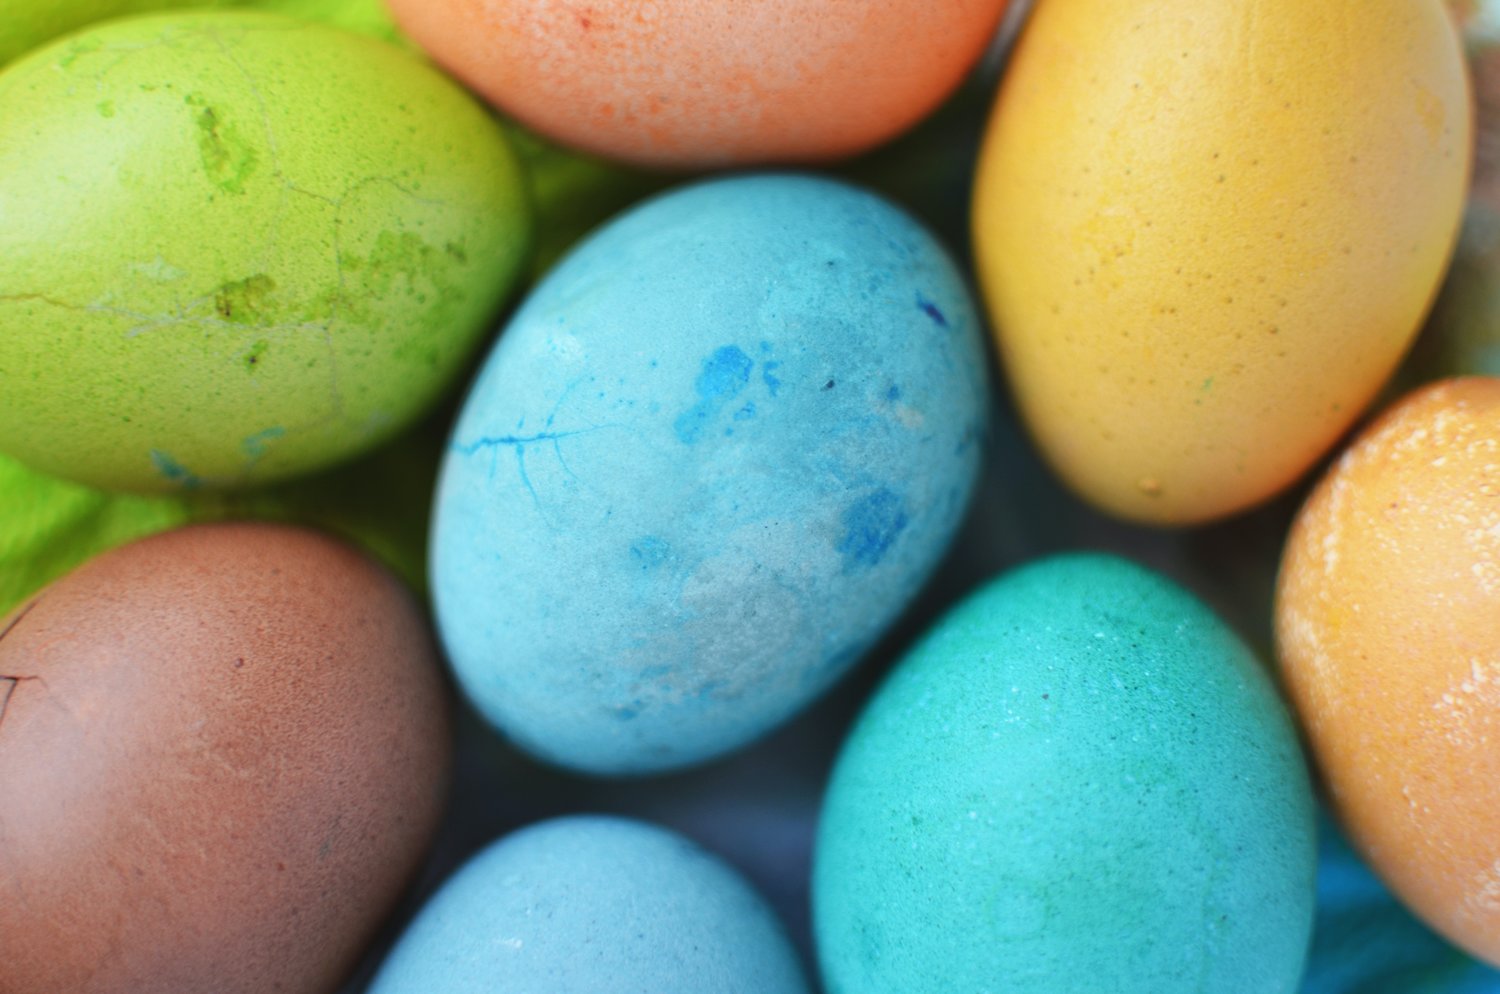 There are more Easter events in the Katy area than what is included in this article. Katy Times readers should contact their local churches for information regarding Easter services and events.